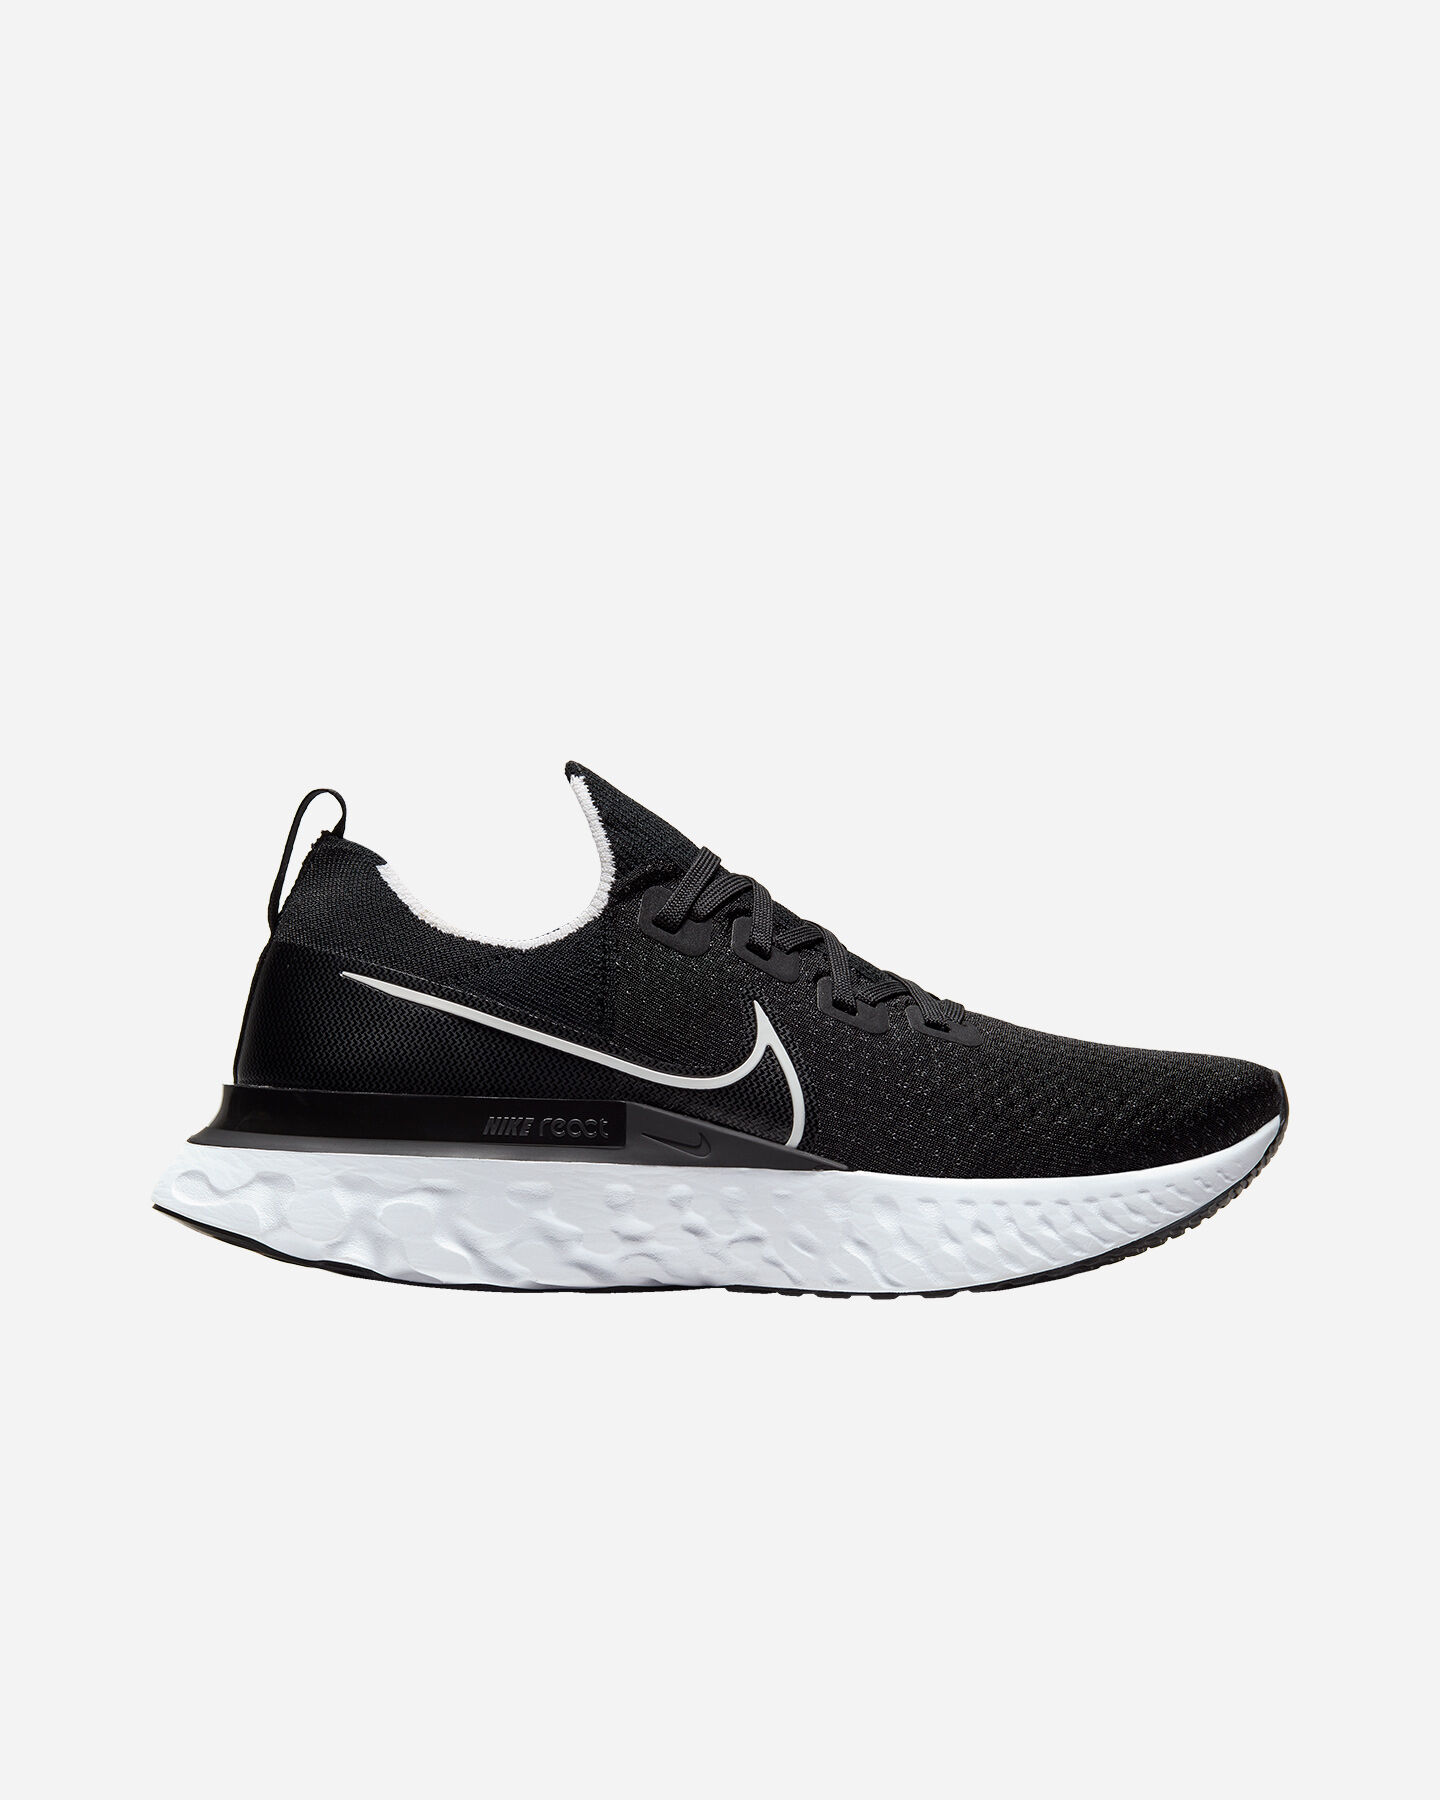  Scarpe running NIKE EPIC PRO REACT FLYKNIT M S5162015|002|6 scatto 0